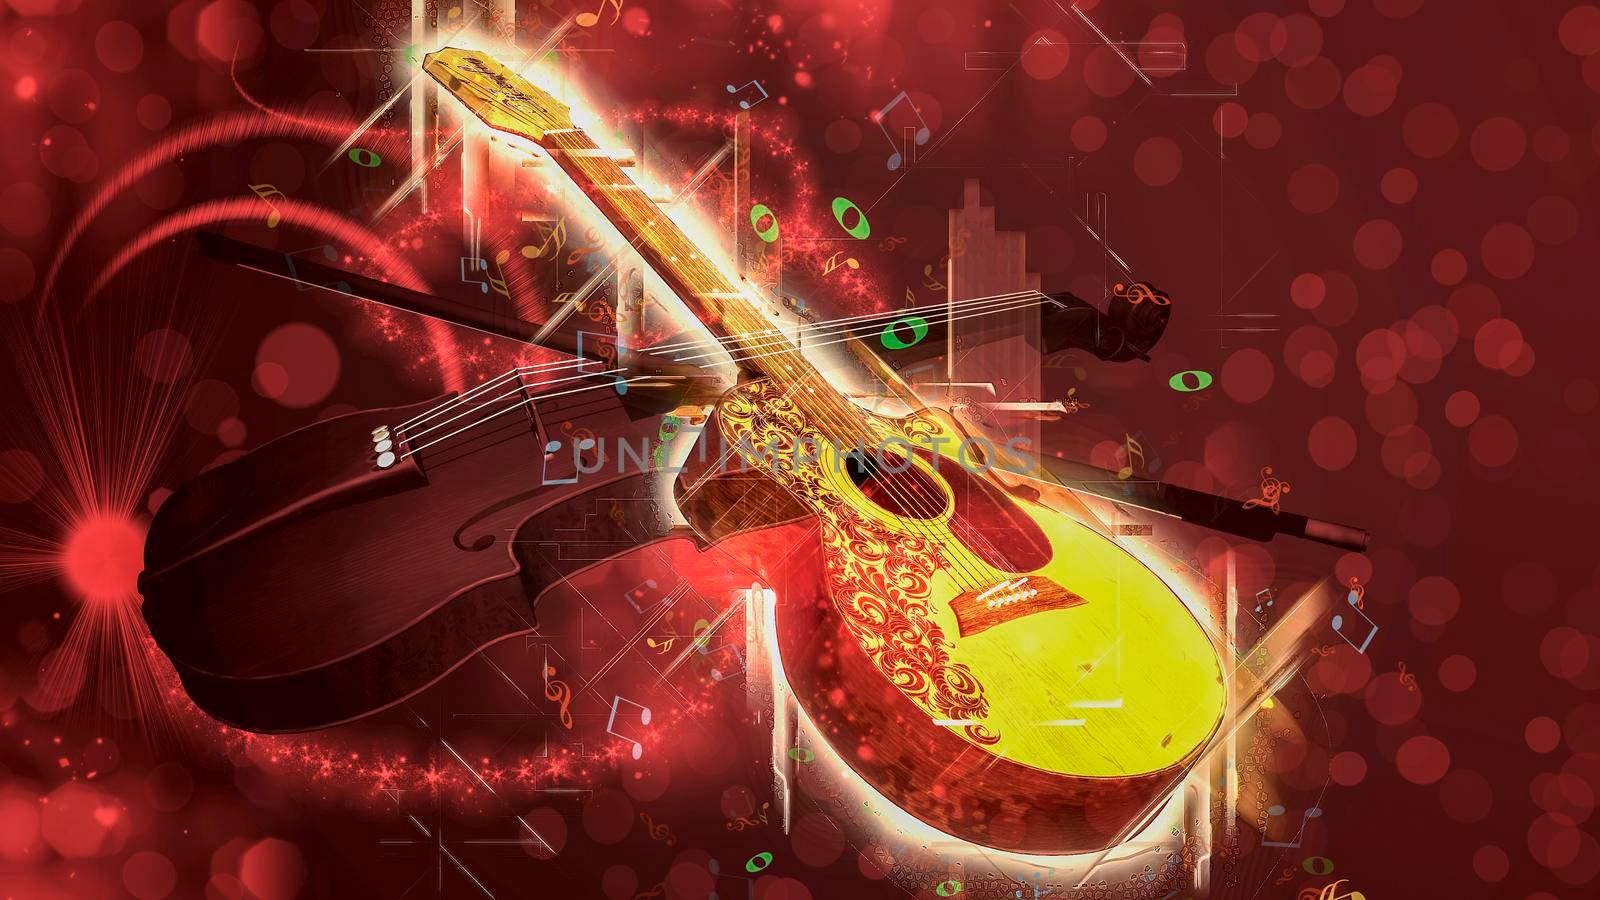 Acoustic classical guitar and violin on black background with music notes - 3d rendering